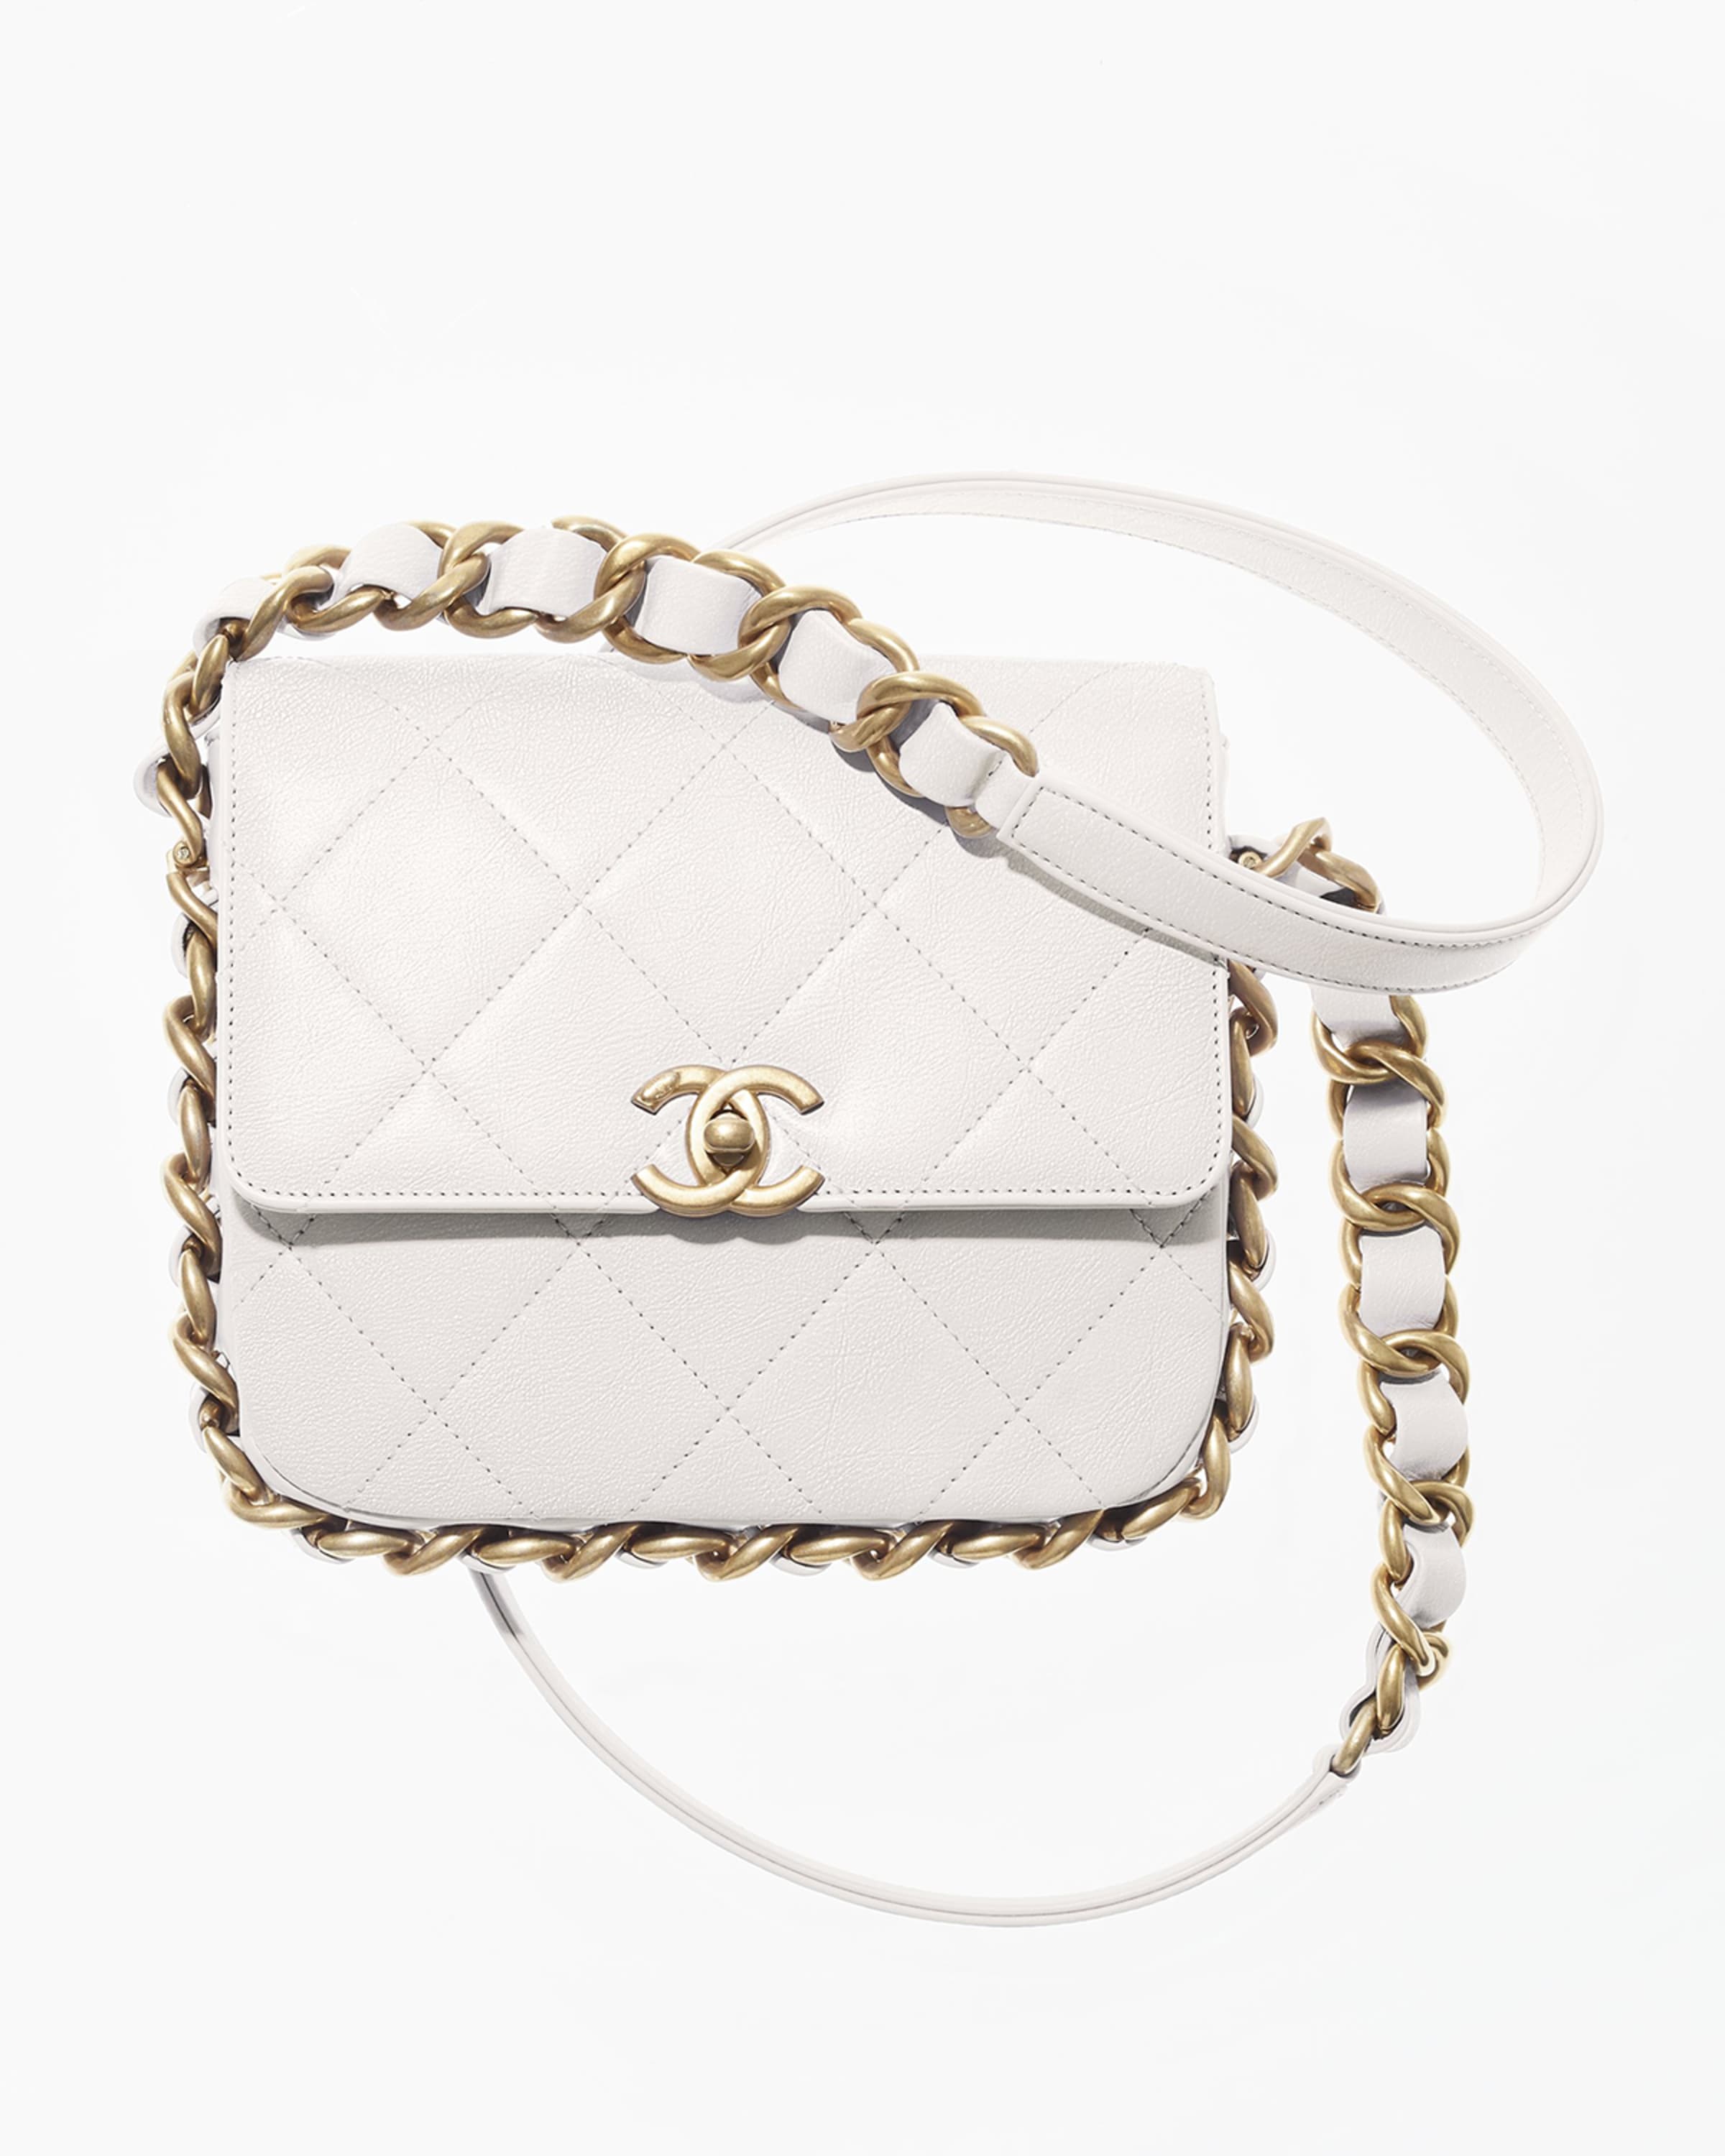 CHANEL SMALL FLAP BAG